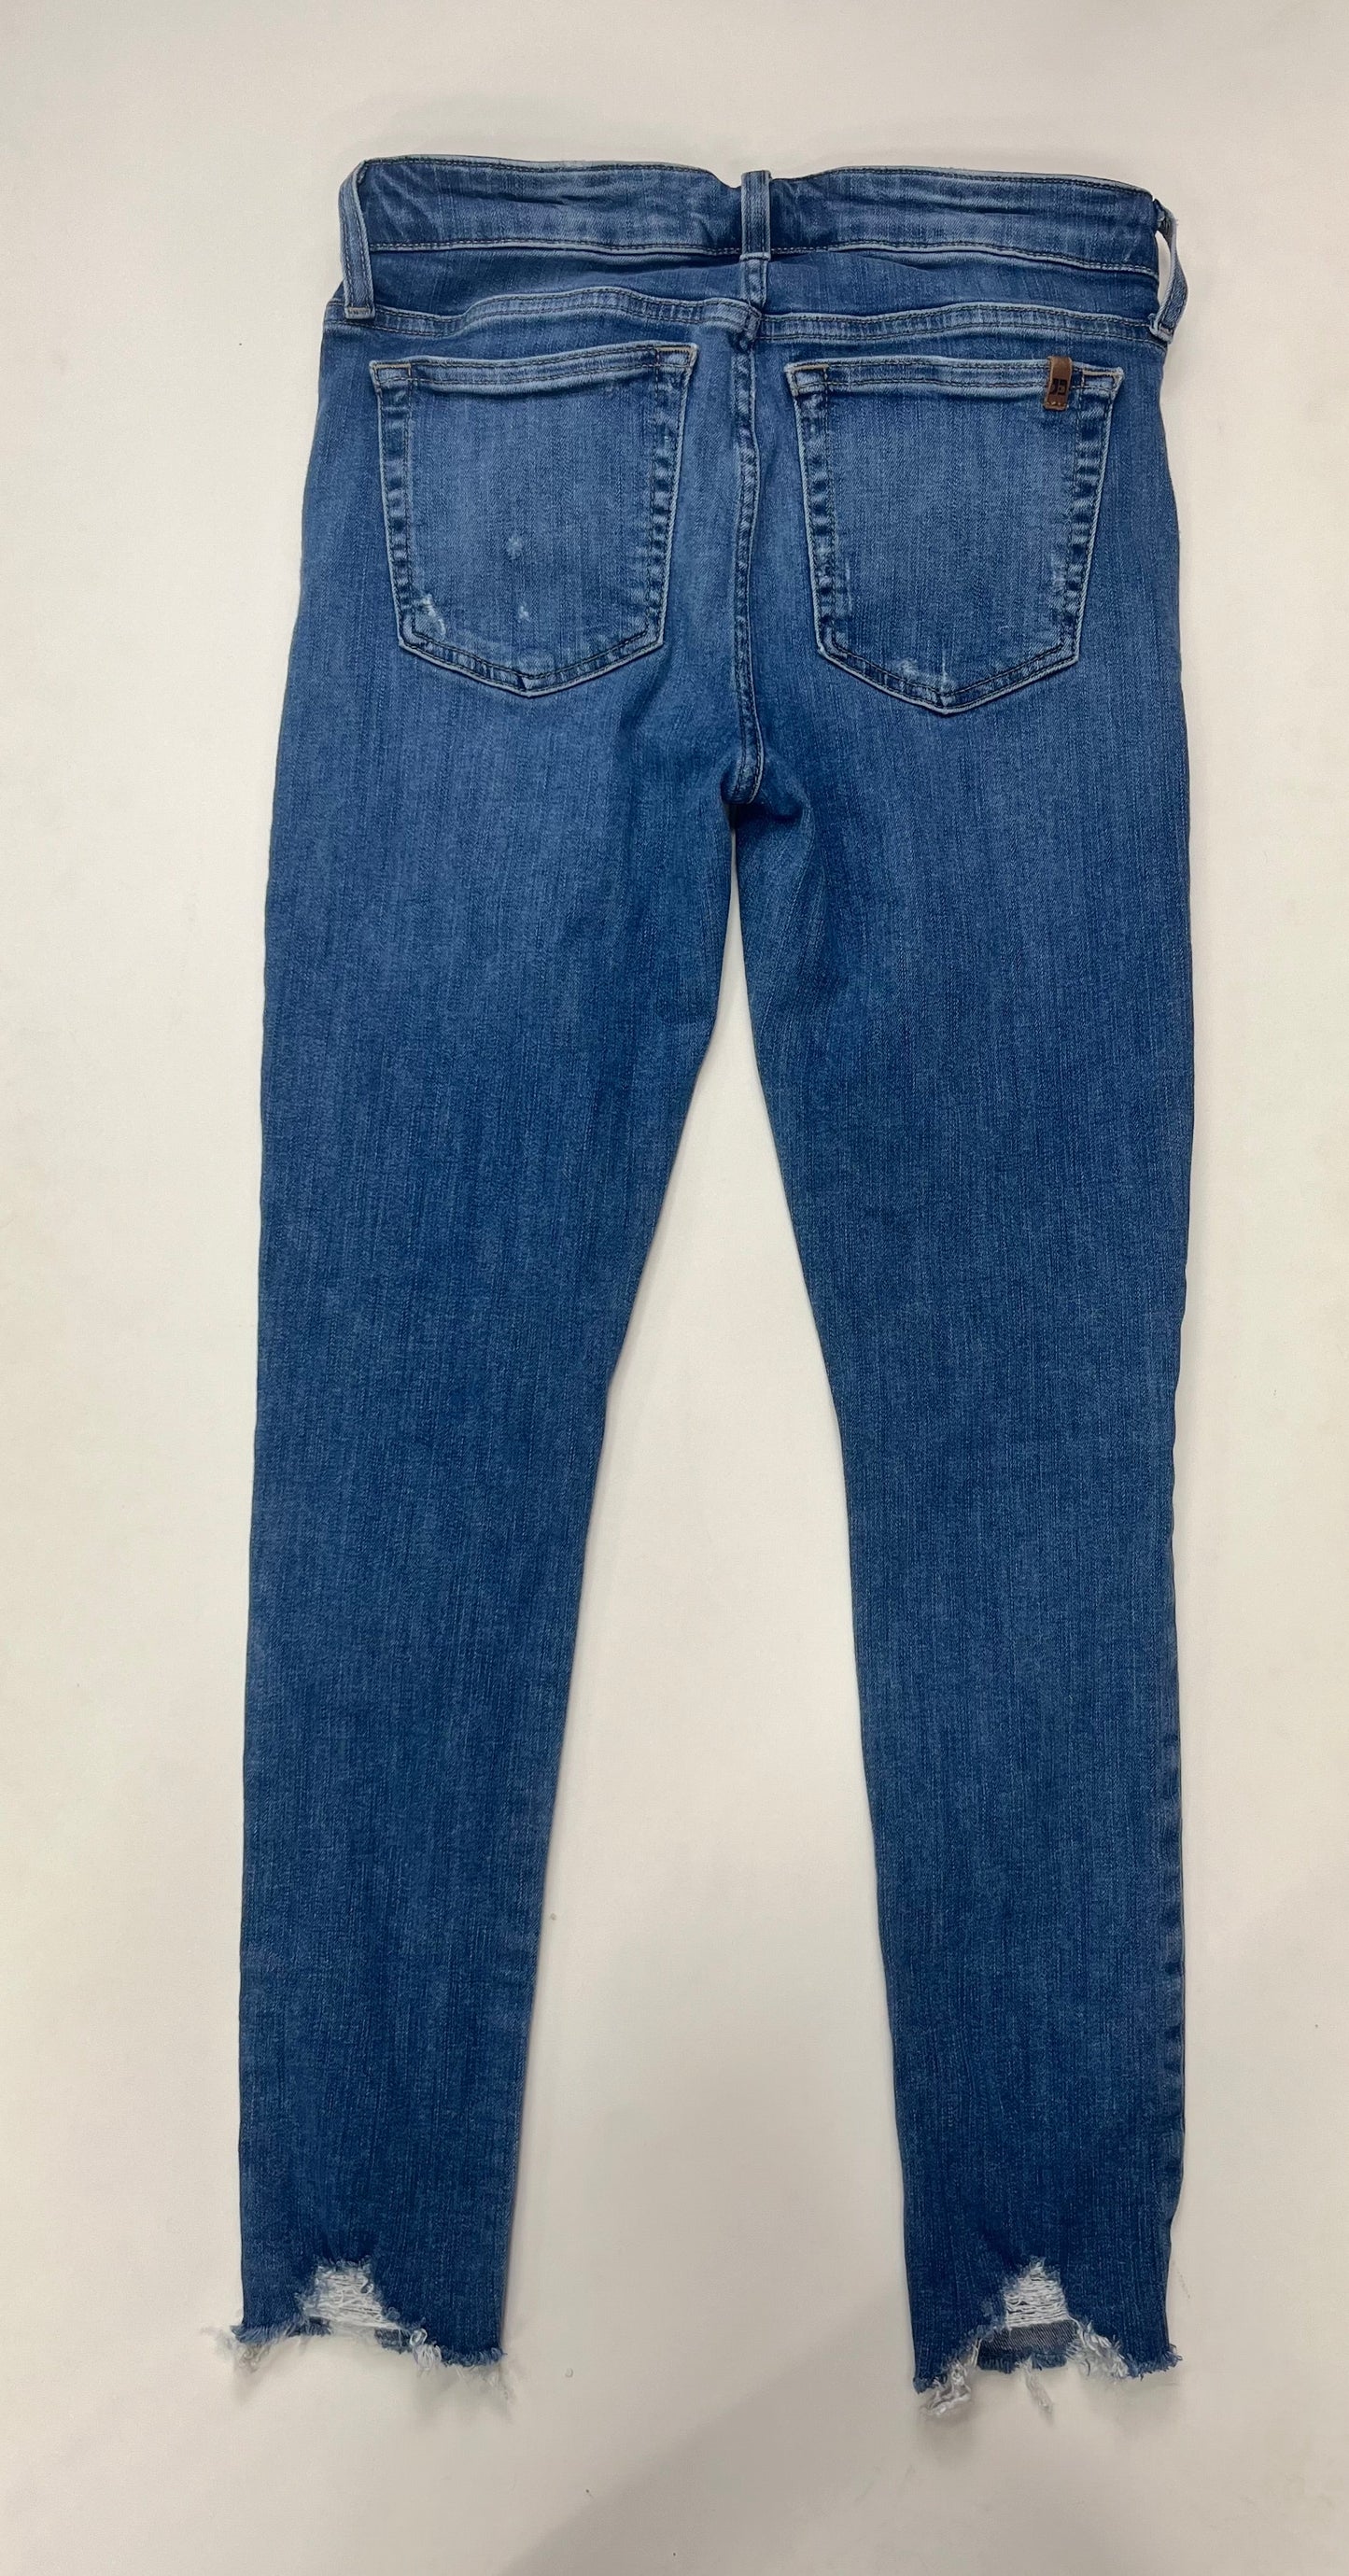 Jeans Skinny By Joes Joes  Size: 28